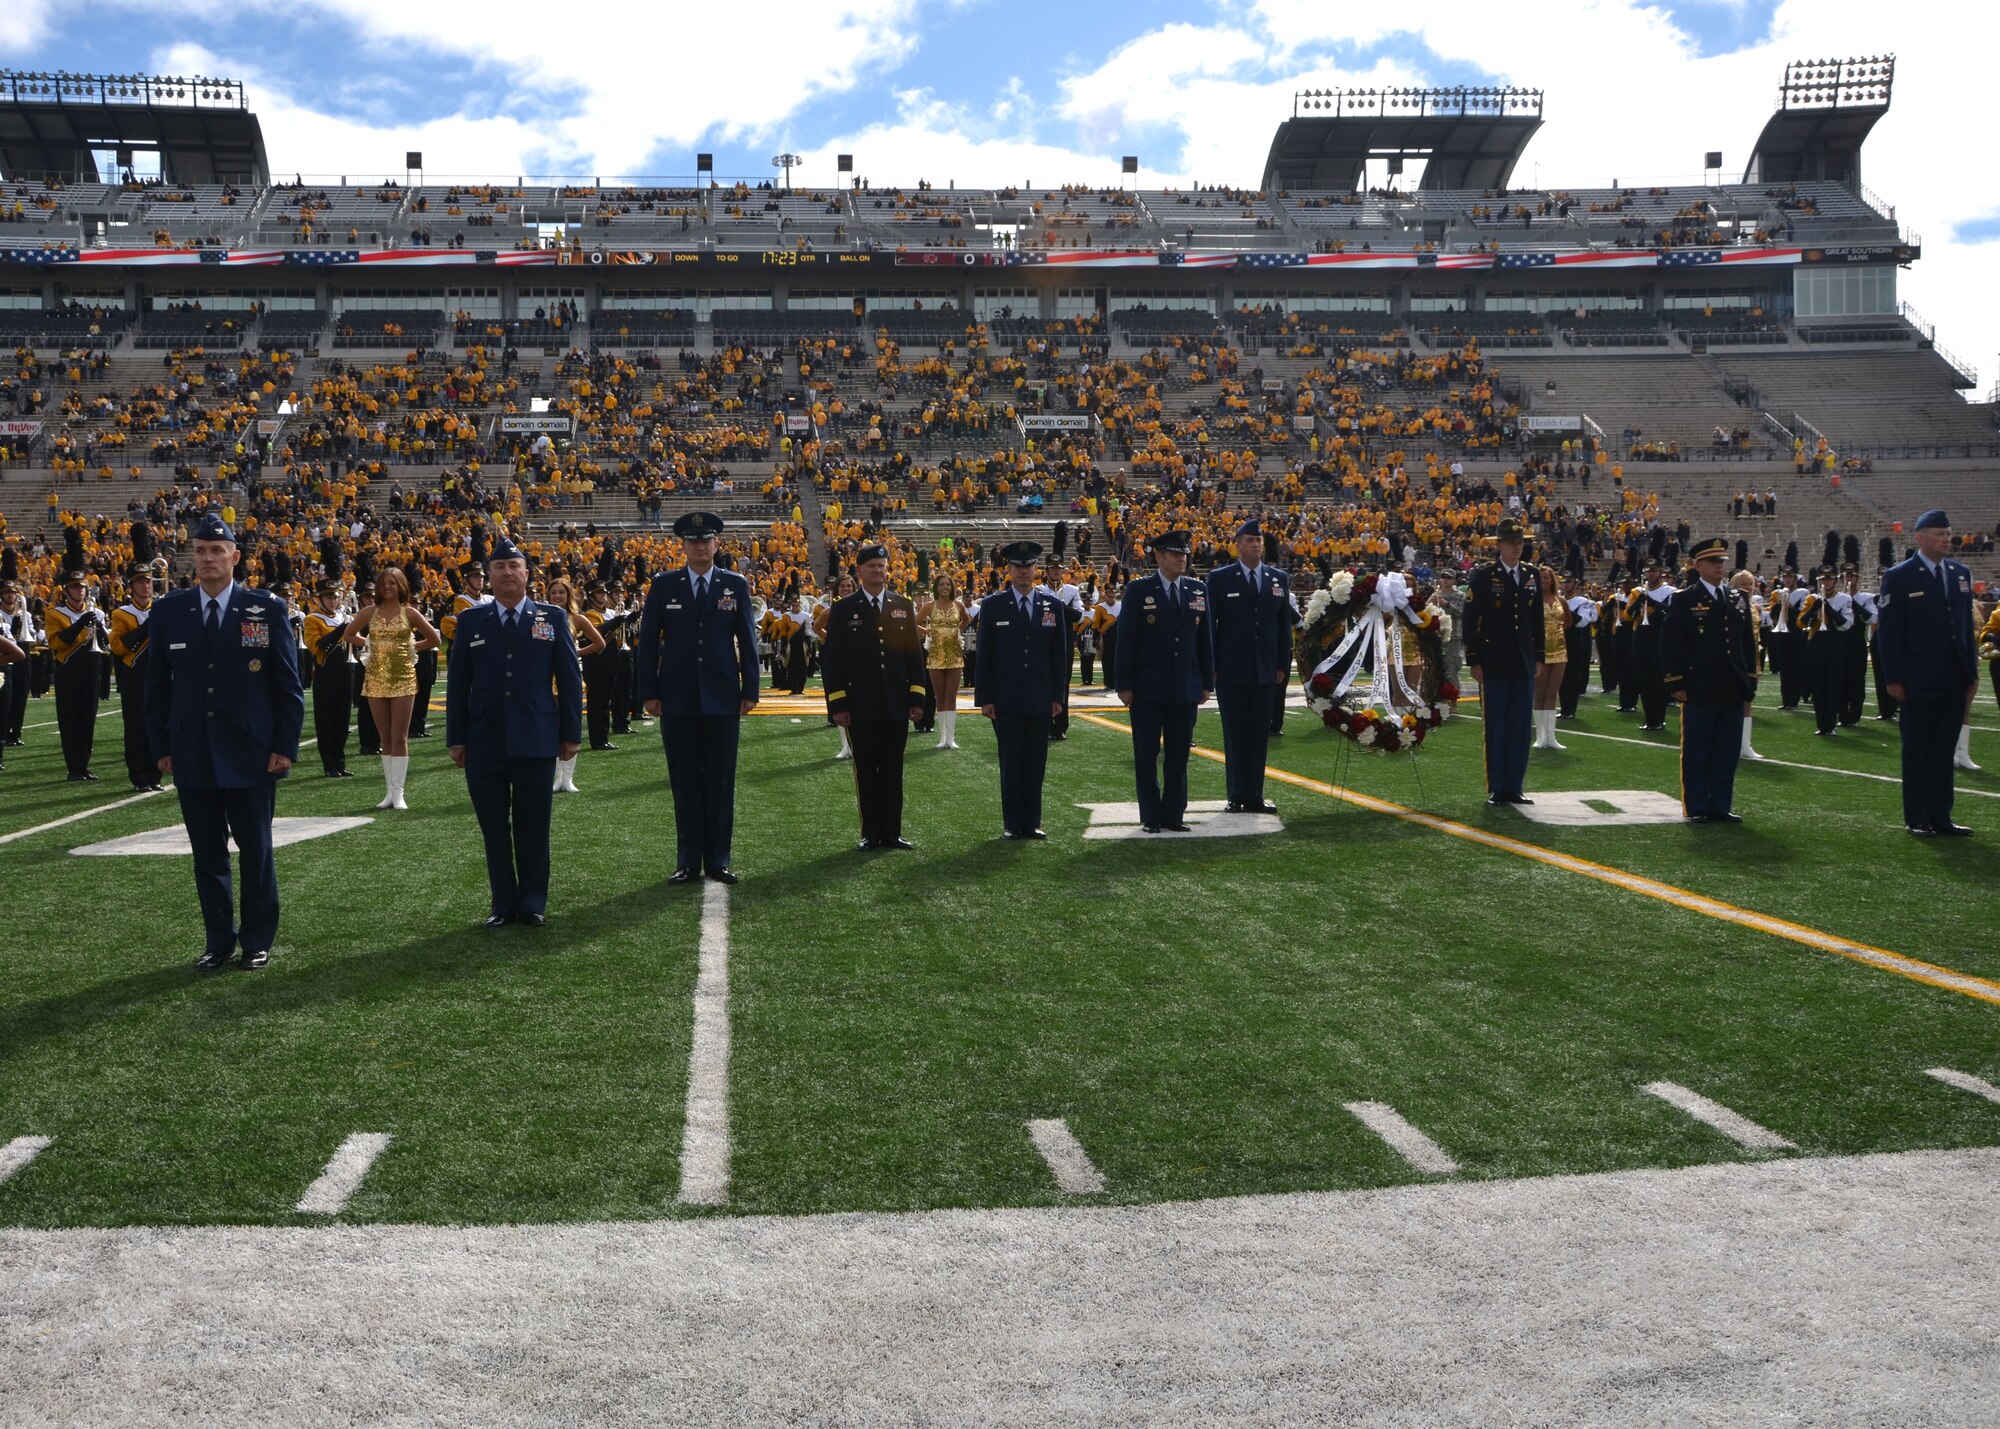 Military leadership and National Adopt A Warrior honorees take their places on the football field for a ceremony at the University of Missouri in Columbia, Oct. 3, 2015.  The servicemen and women were honored prior to the game as part of Military Appreciation Day.  (U.S. Air National Guard photo by Tech. Sgt. Traci Howells)